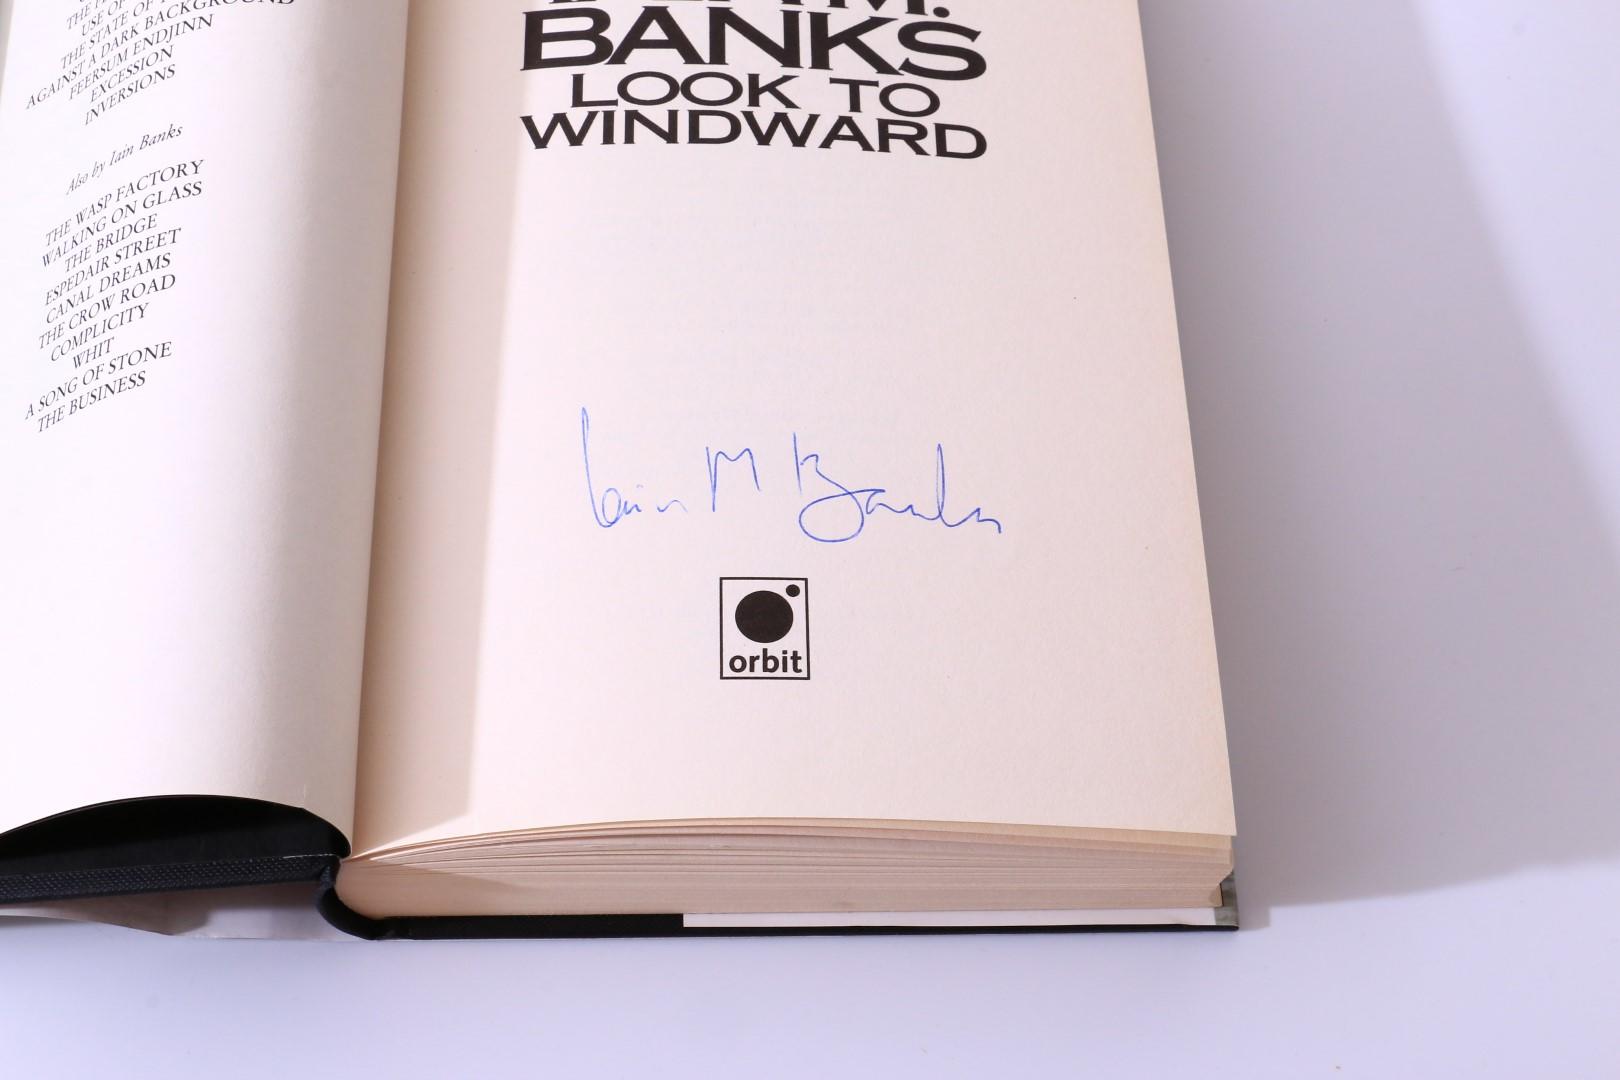 Iain M. Banks - Look to Windward - Orbit, 2000, Signed First Edition.